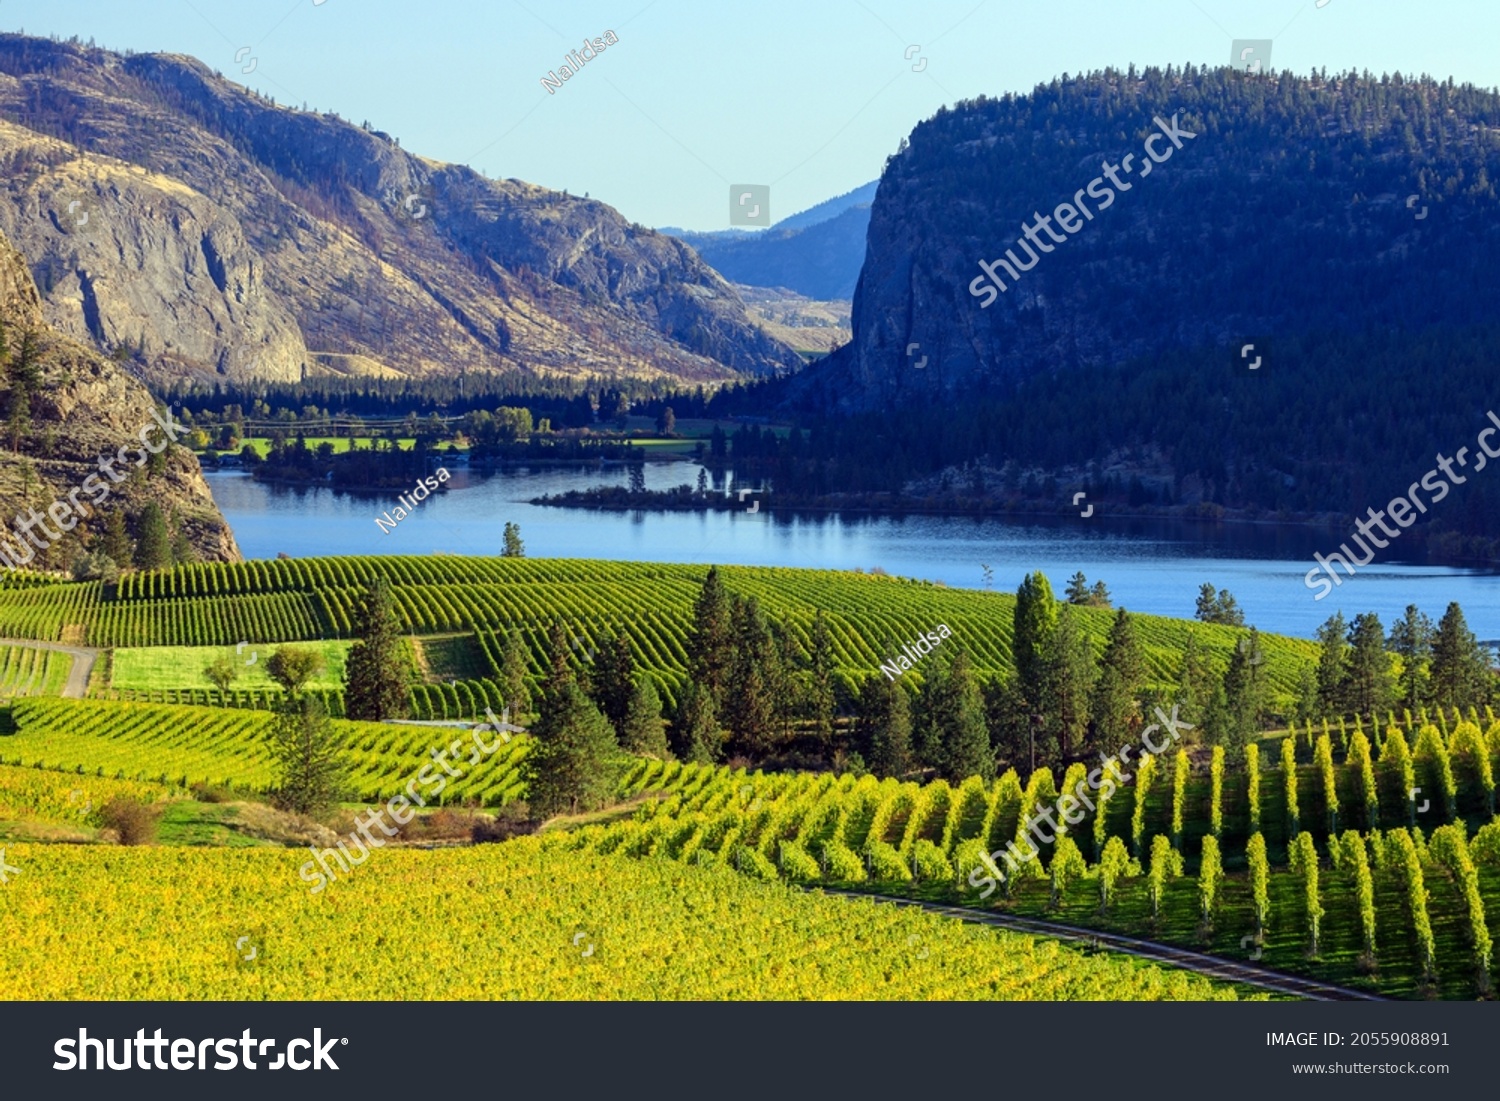 View of Blue Mountain Vineyard with McIntyre Bluff and Vaseux Lake in the background located in the Okanagan Valley in Okanagan Falls, British Columbia, Canada. #2055908891